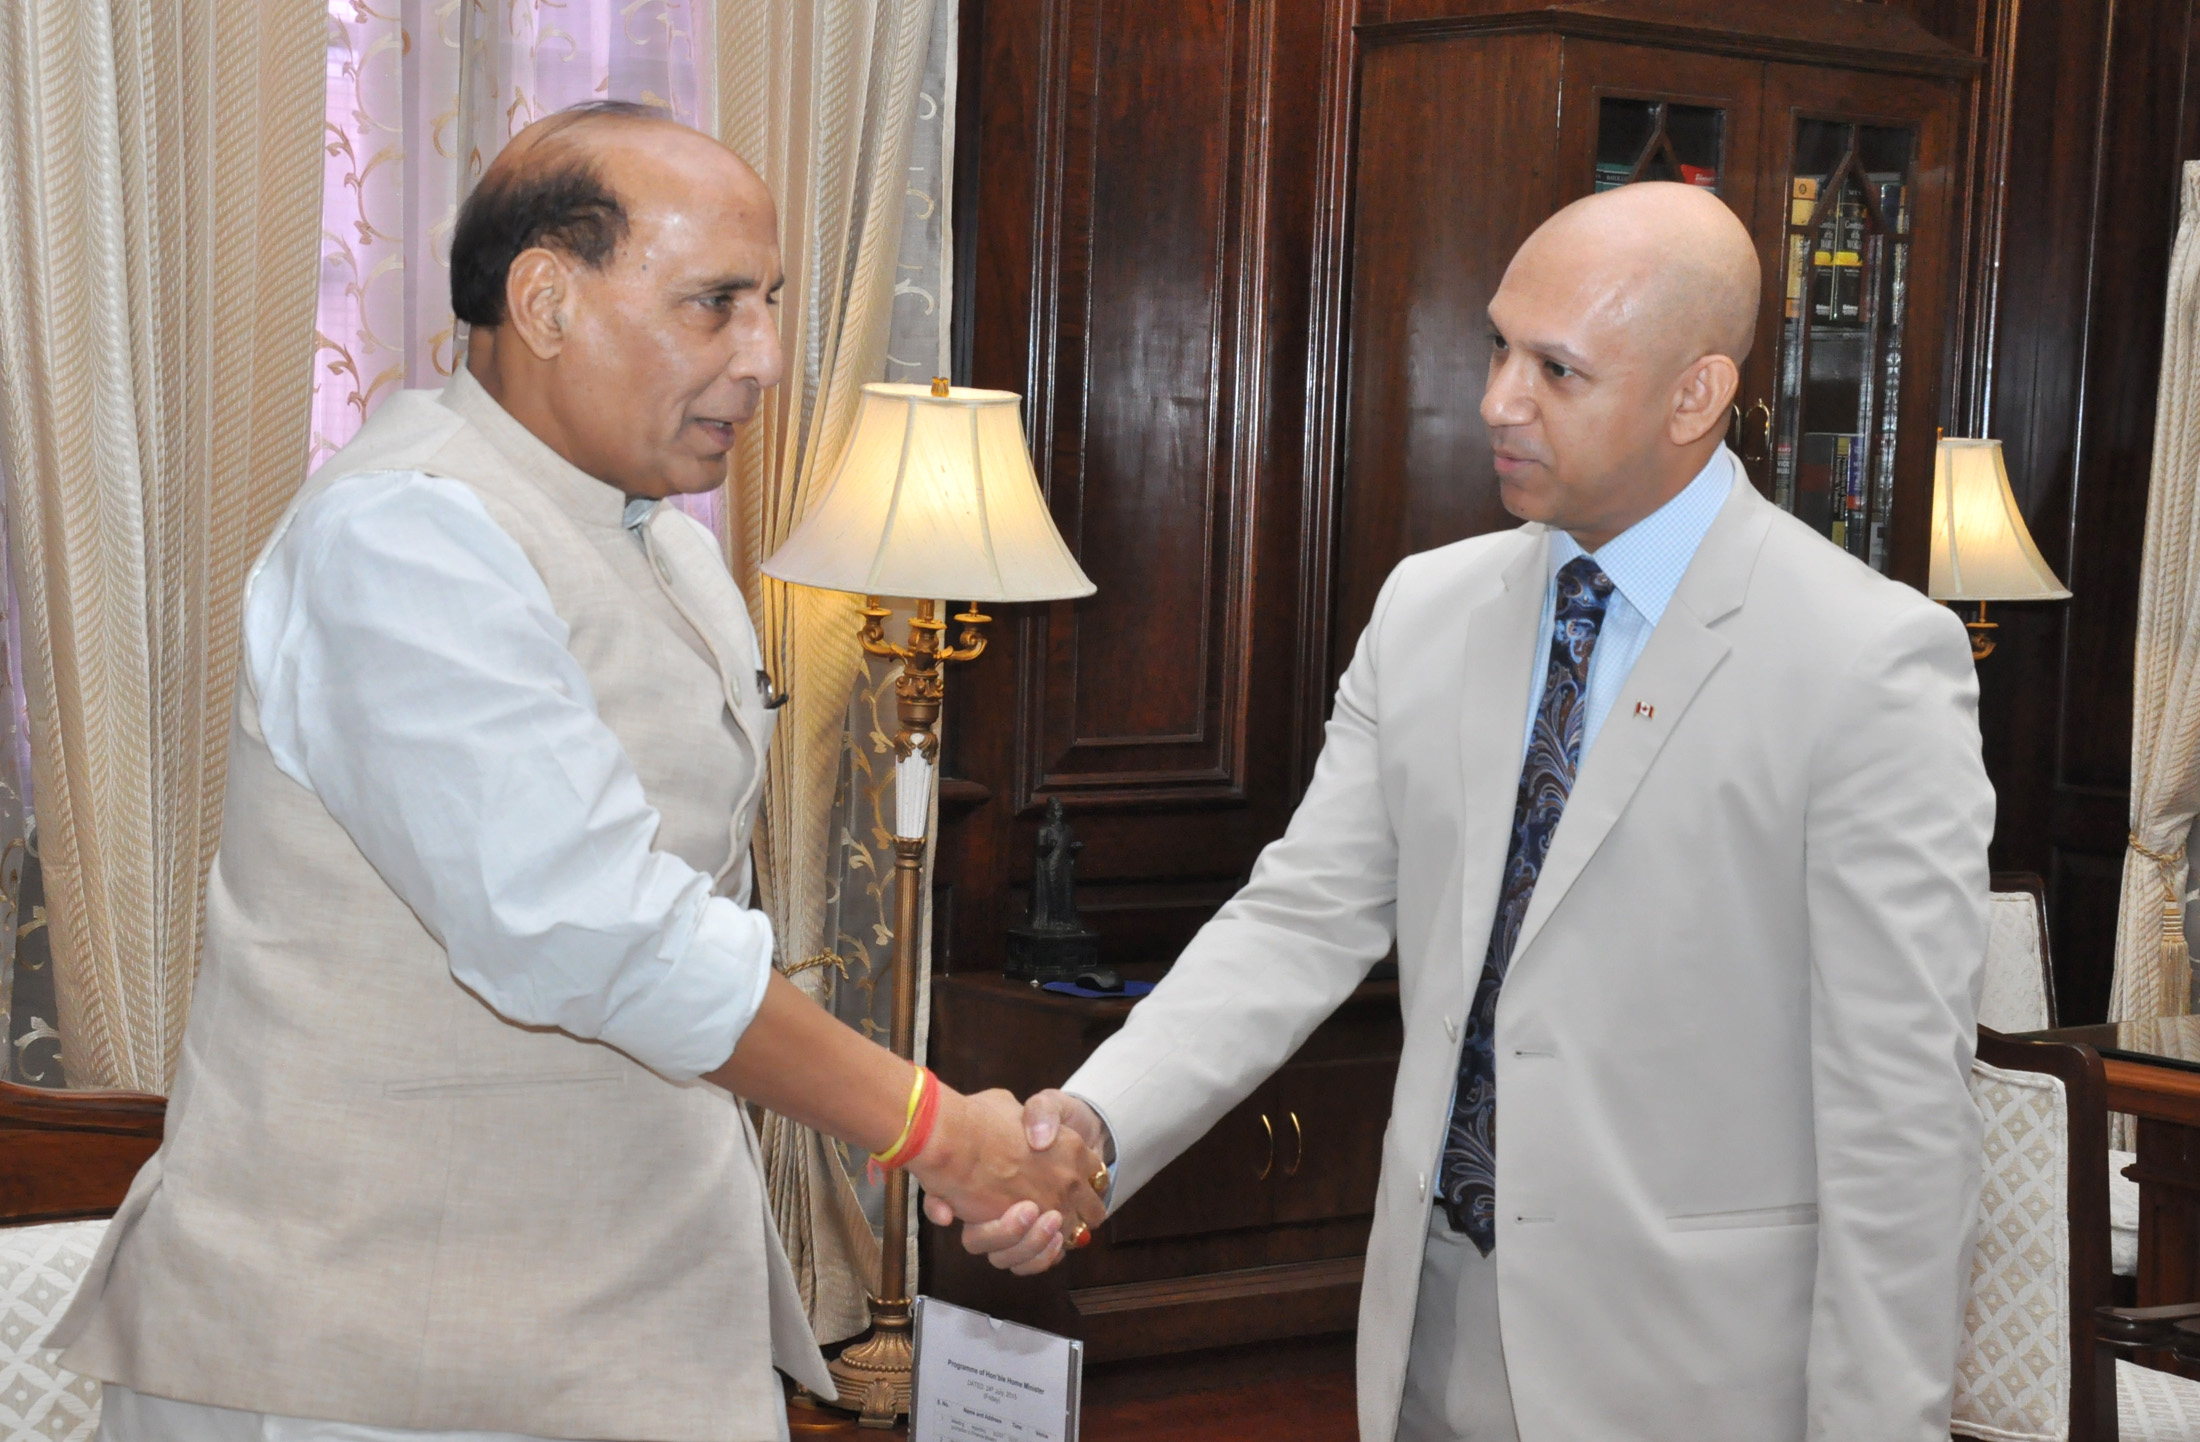 The Canadian High Commissioner to India, Mr. Nadir Patel calling on the Union Home Minister, Shri Rajnath Singh, in New Delhi on July 24, 2015.